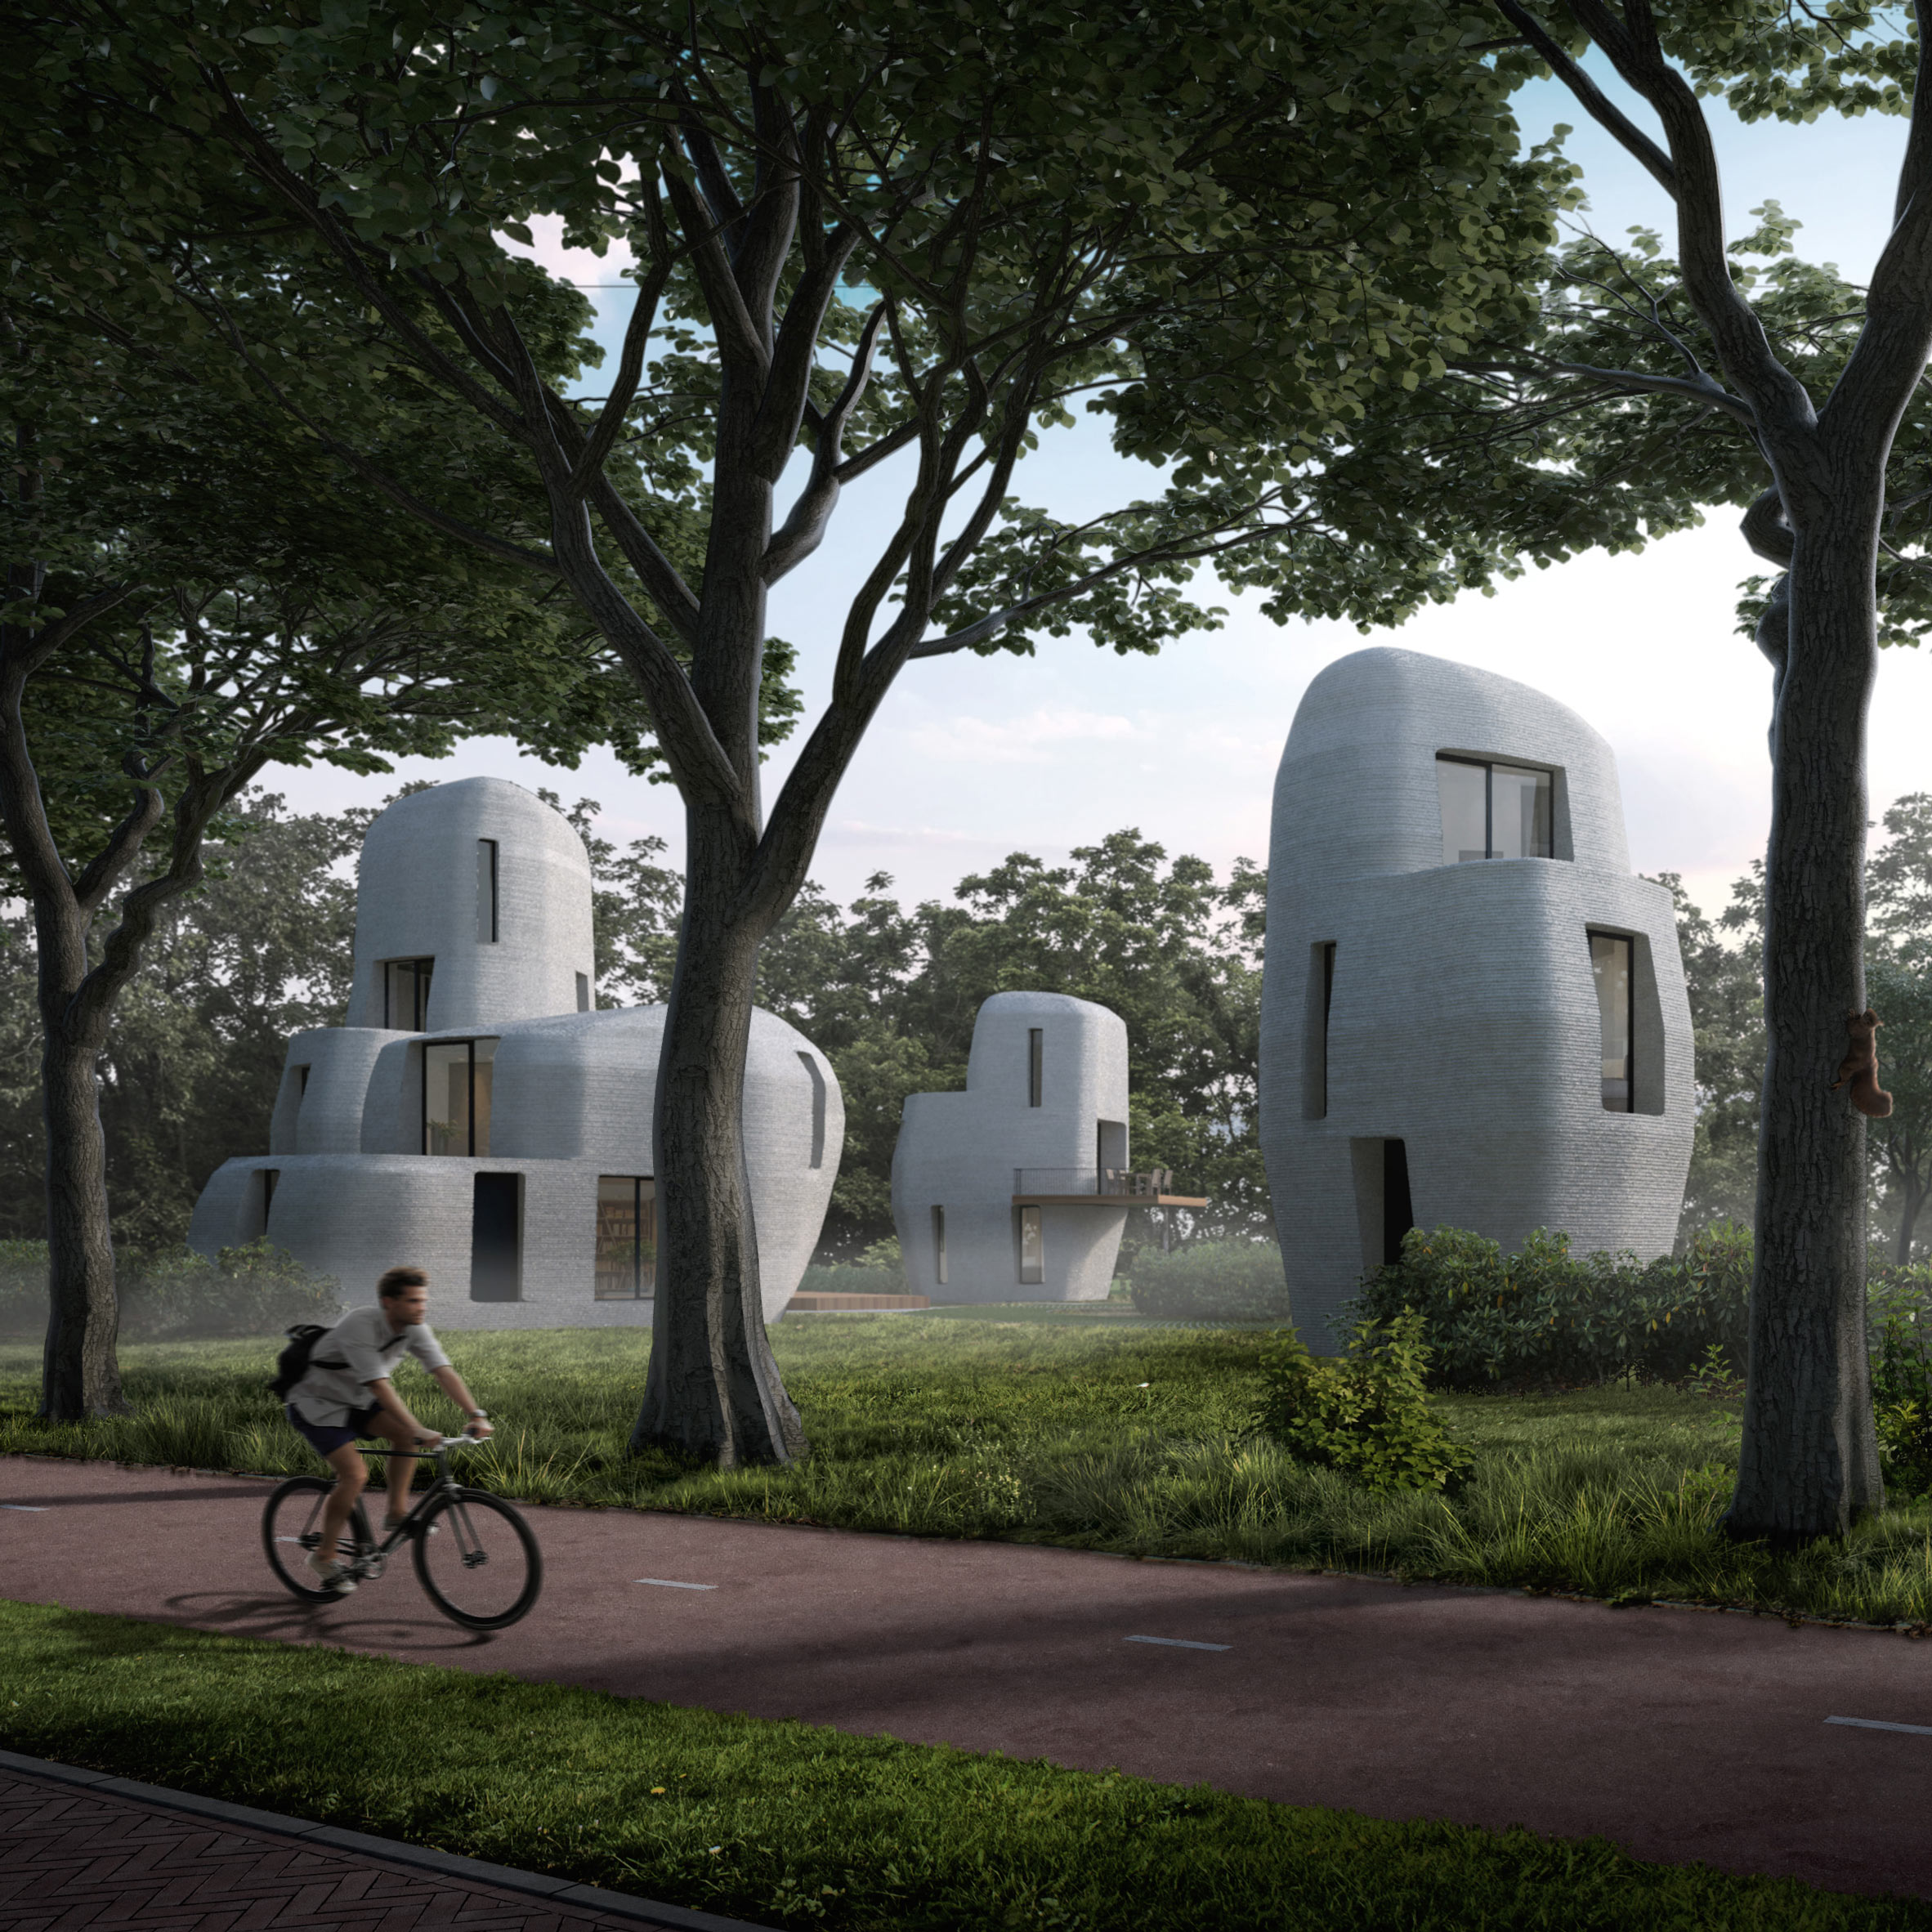 Eindhoven to "world's 3D-printed houses that can live